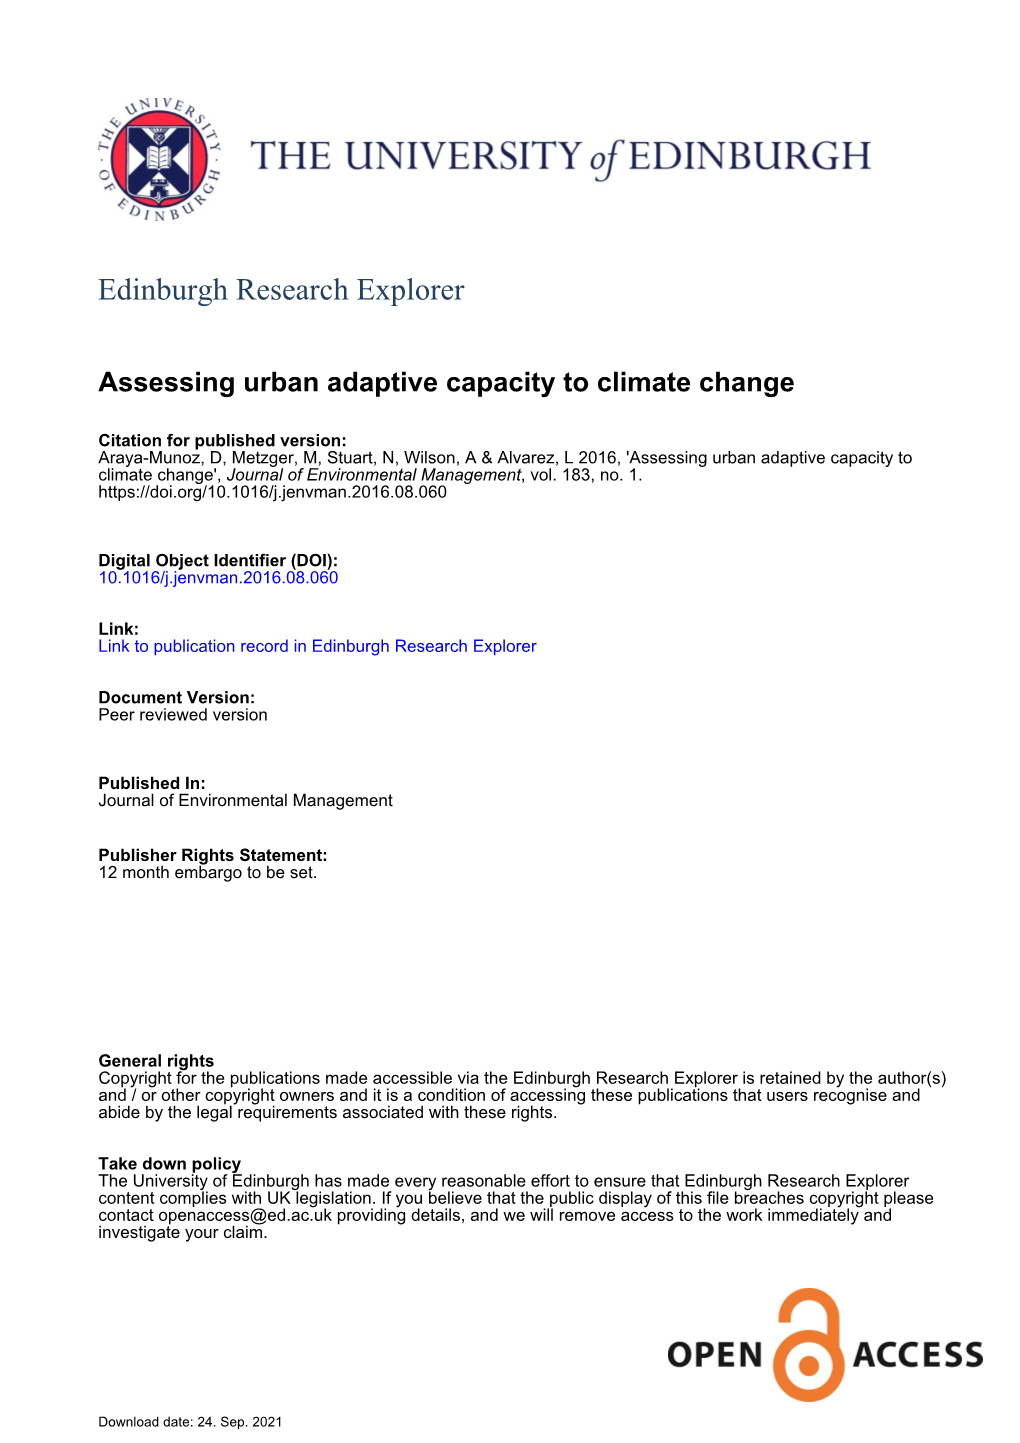 Assessing Urban Adaptive Capacity to Climate Change